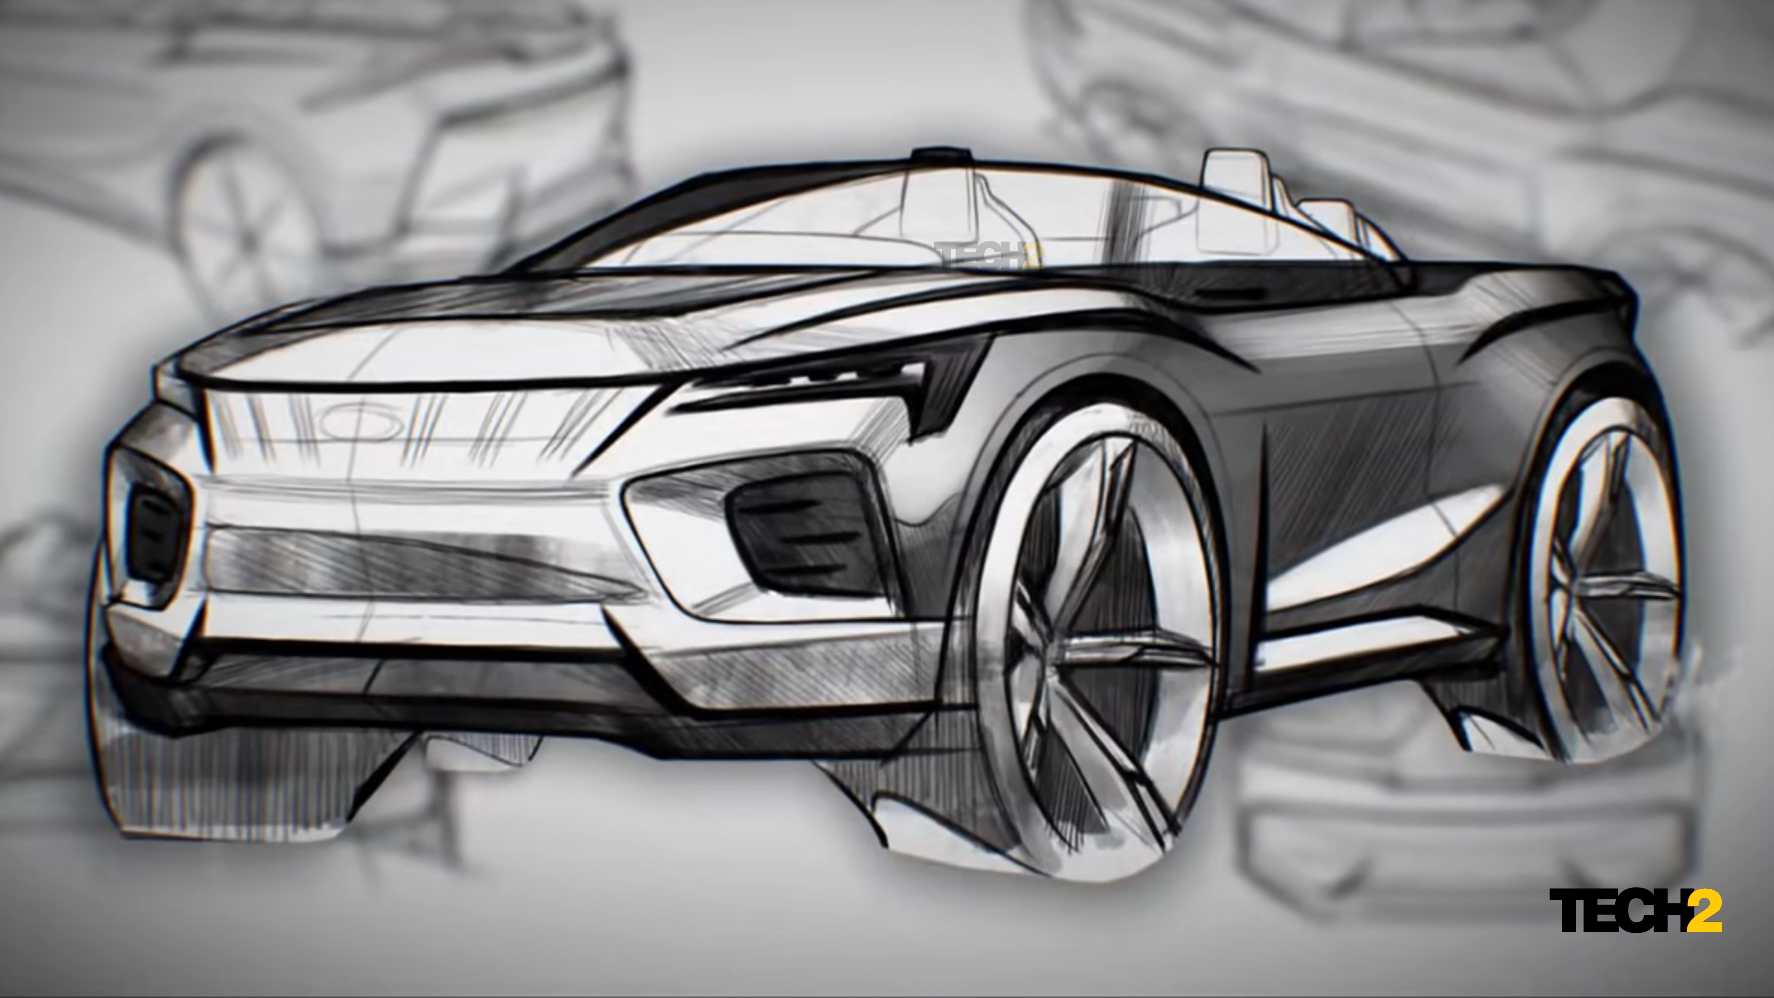 Mahindra's new design centre in the UK will shape the brand's future models, including electric SUVs. Image: Mahindra